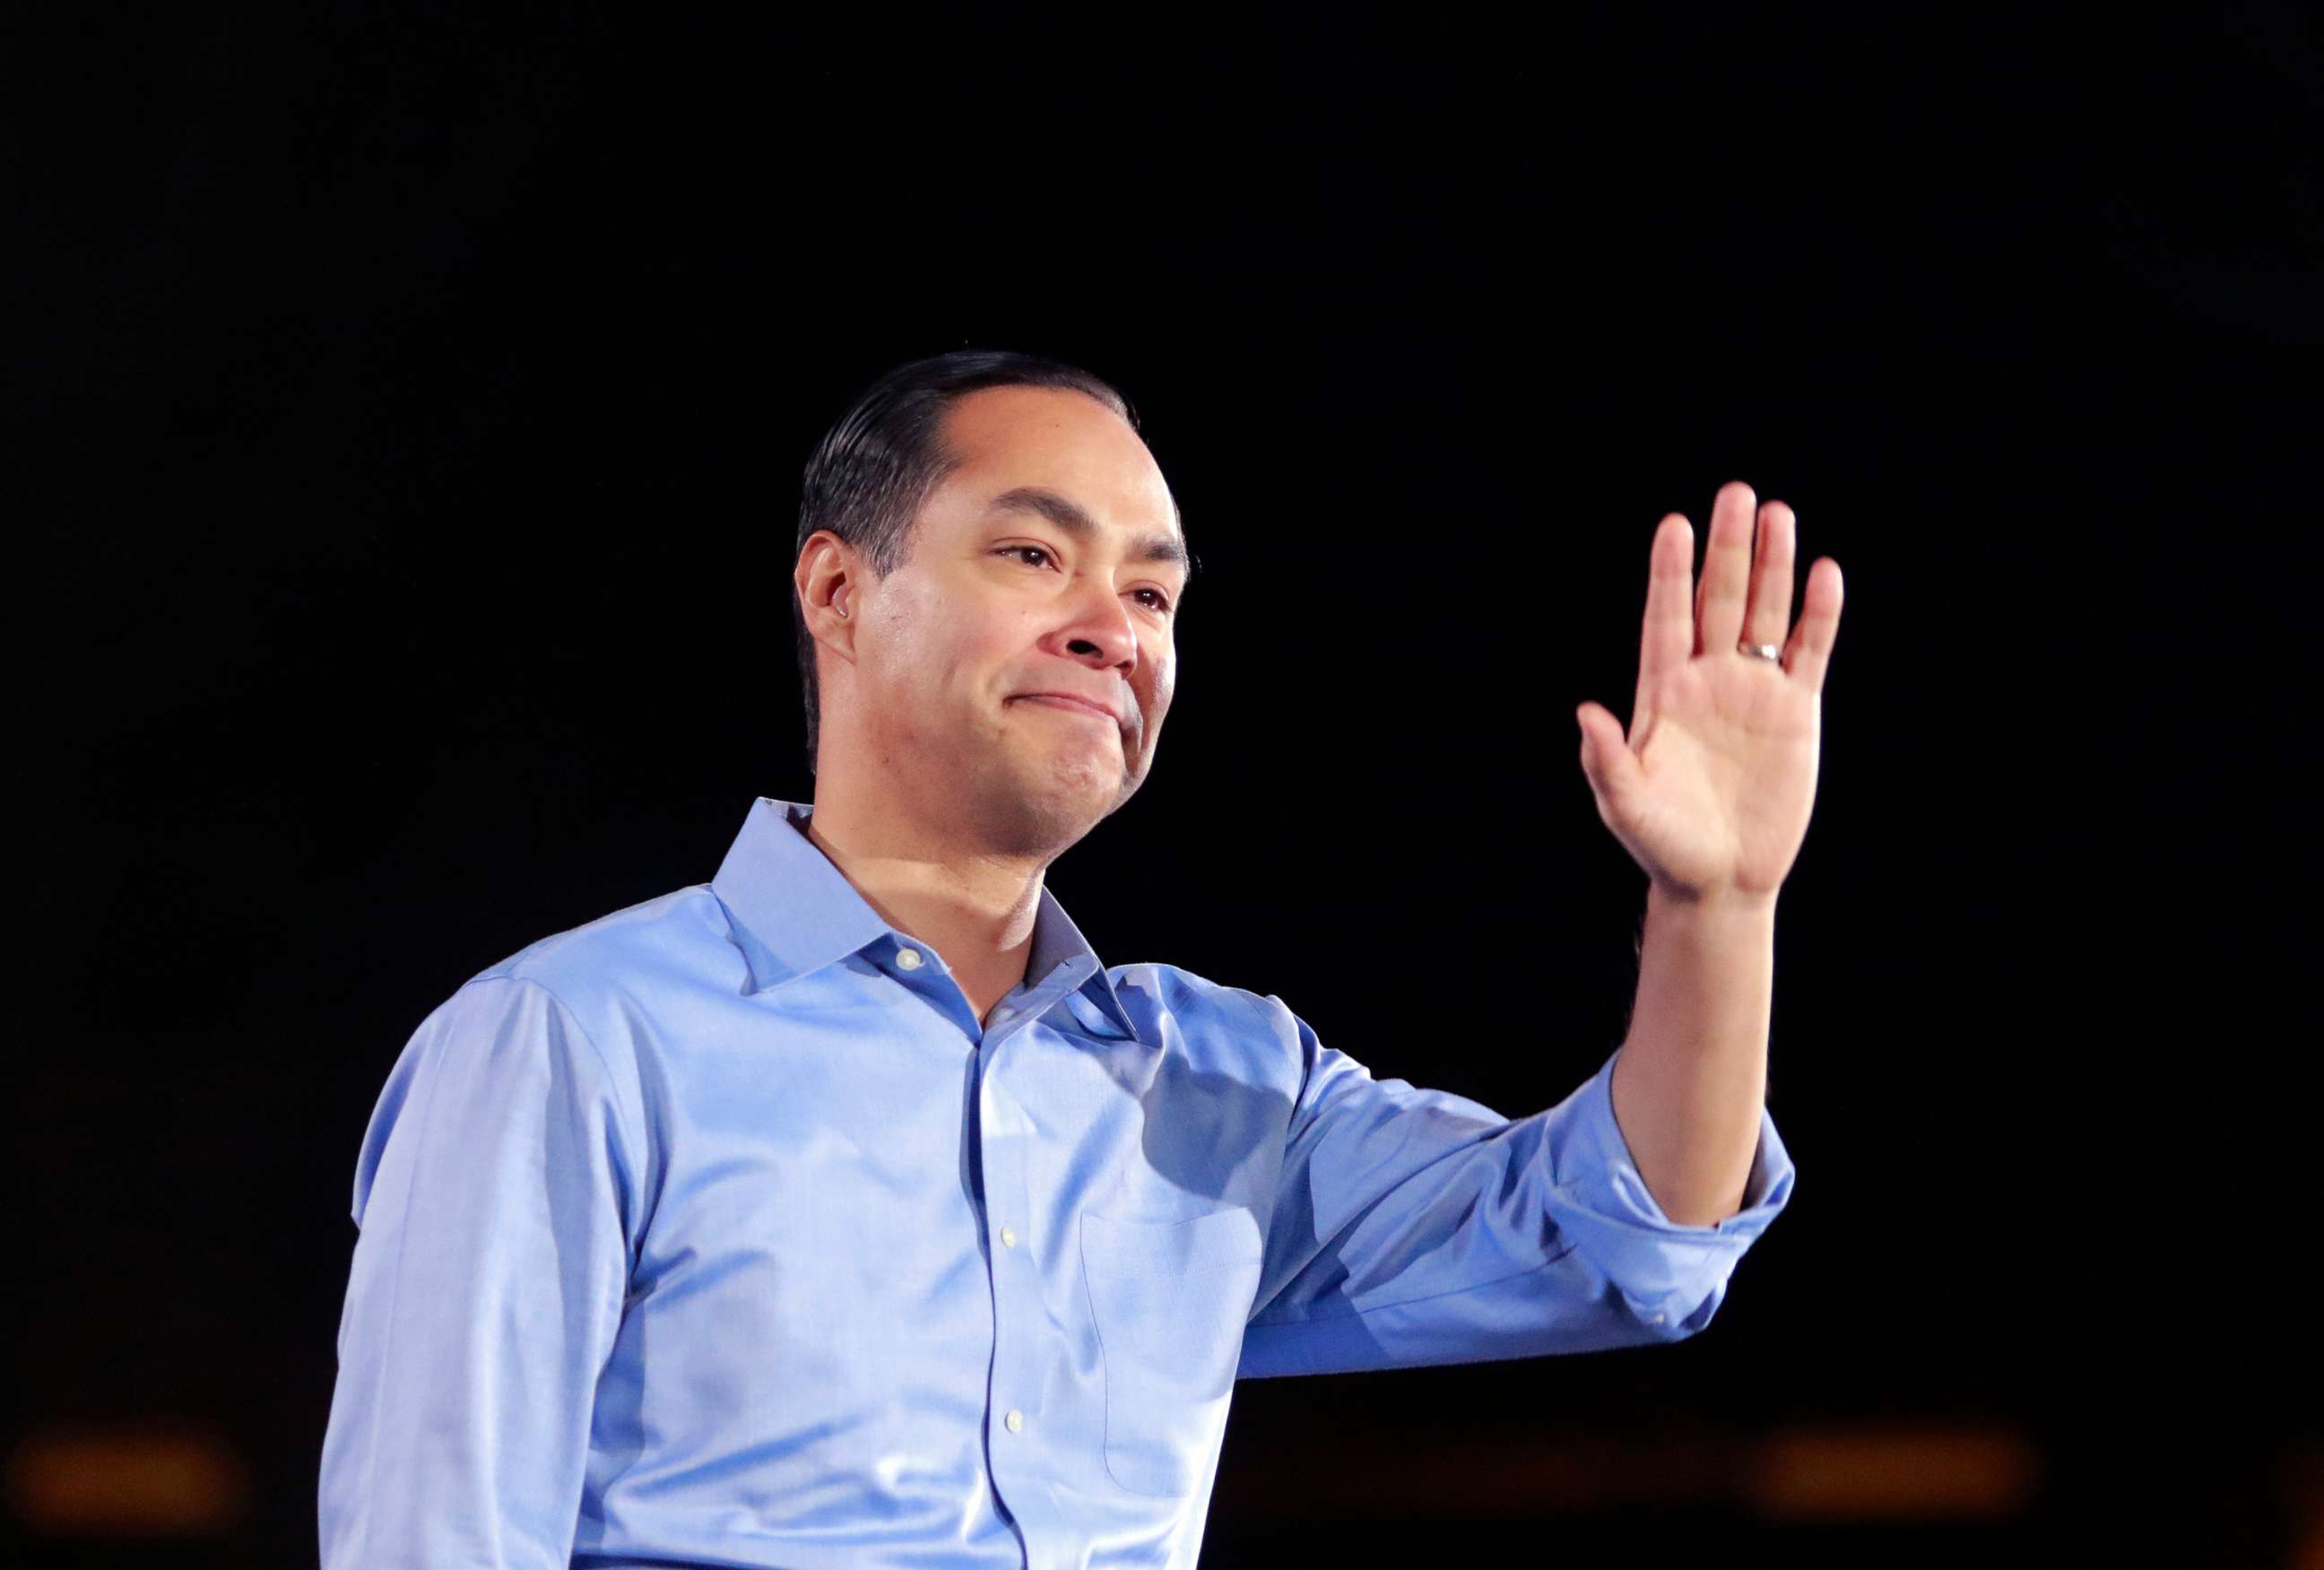 PHOTO: Julian Castro, former Secretary of Housing and Urban Development, speaks at a campaign an an event in Las Vegas, Feb. 21, 2020.